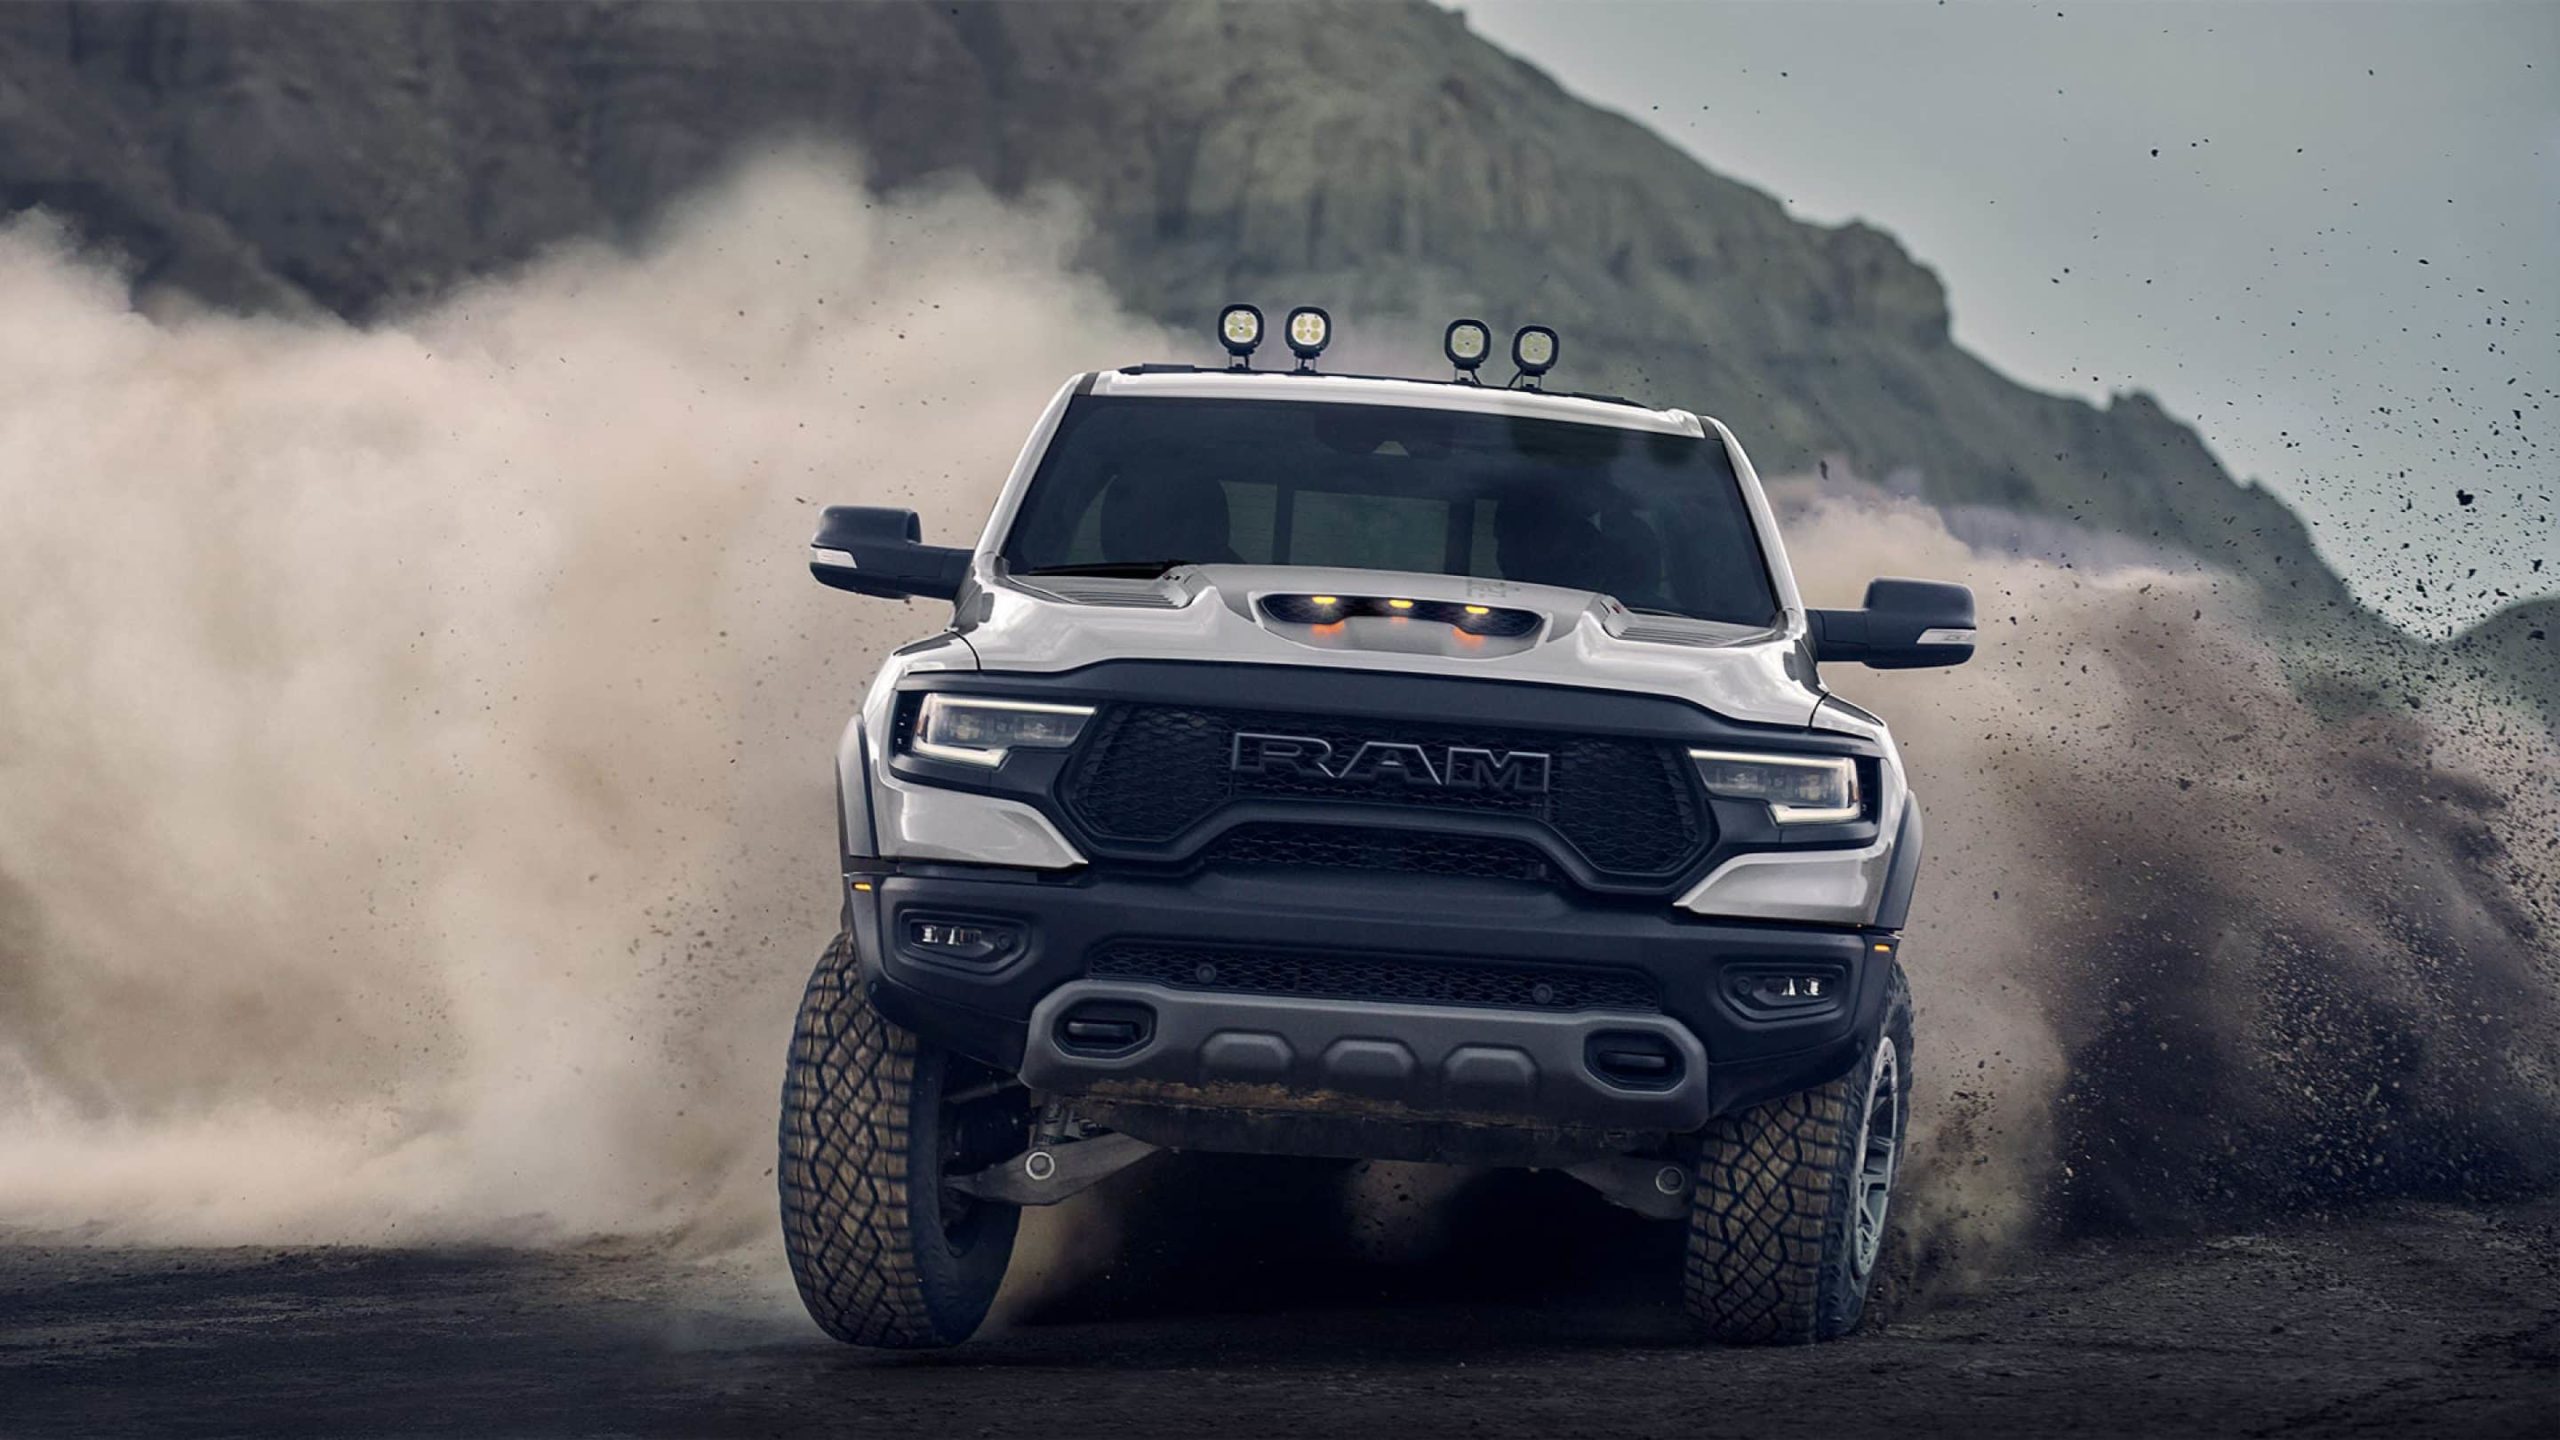 When raging off-road, TRX adapts to varied terrain with Bilstein® Black Hawk® e2 shocks and ground-breaking suspension technology. Plus, you’ll leave your mark wherever you roam with traction-focused tread on the 35-inch Goodyear Wrangler Territory All Terrain tires.